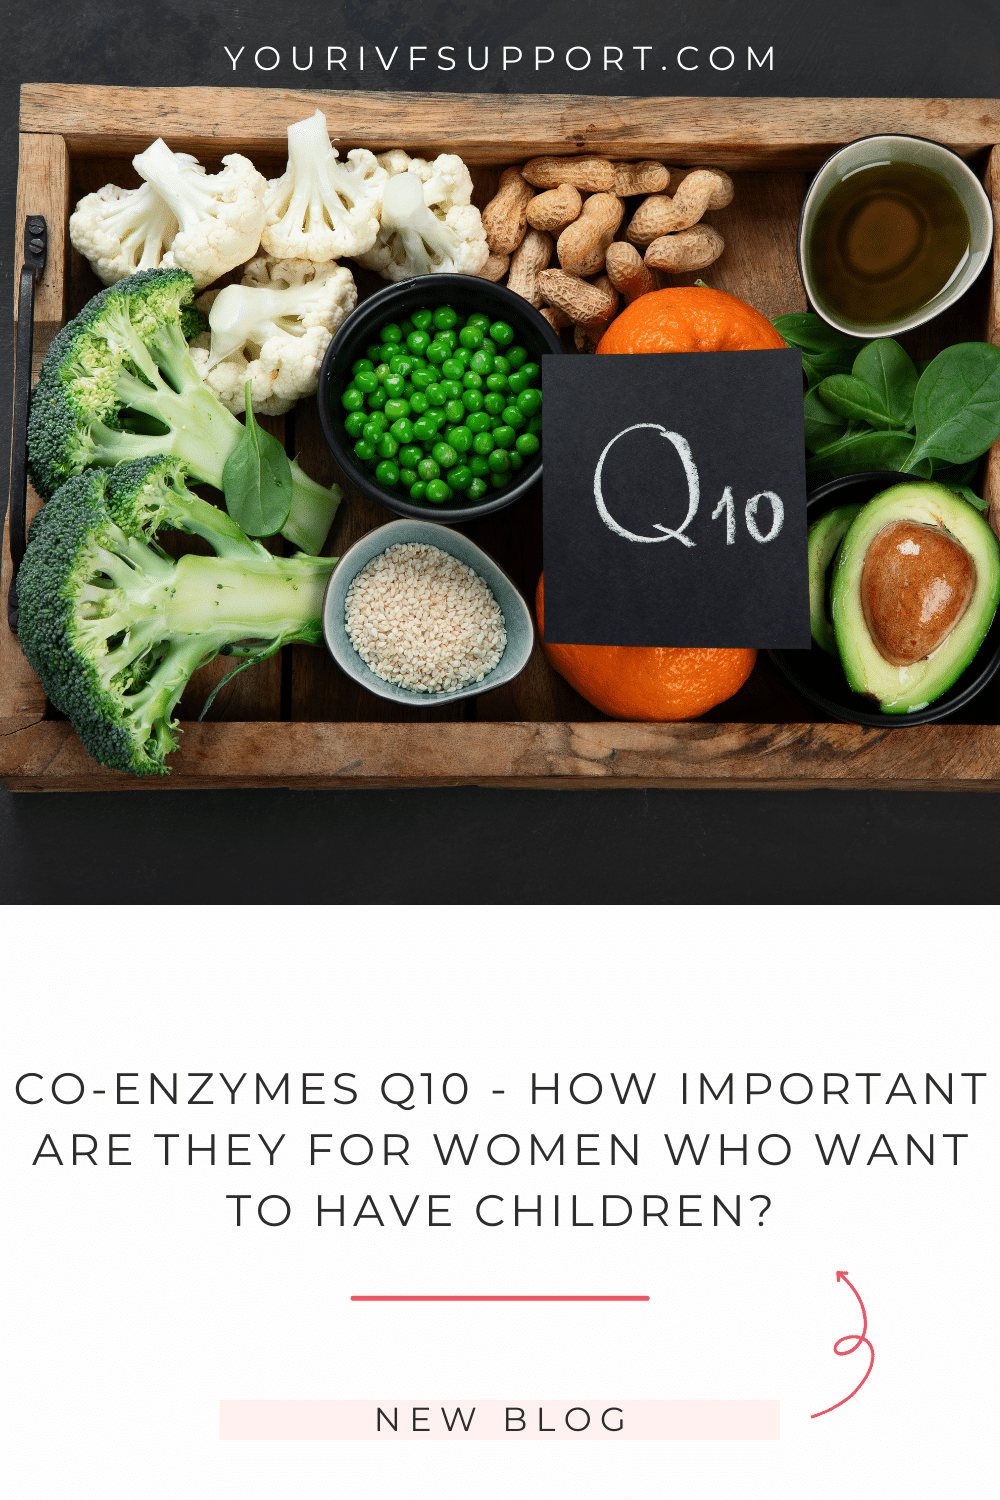 Co-enzymes Q10 and Fertility